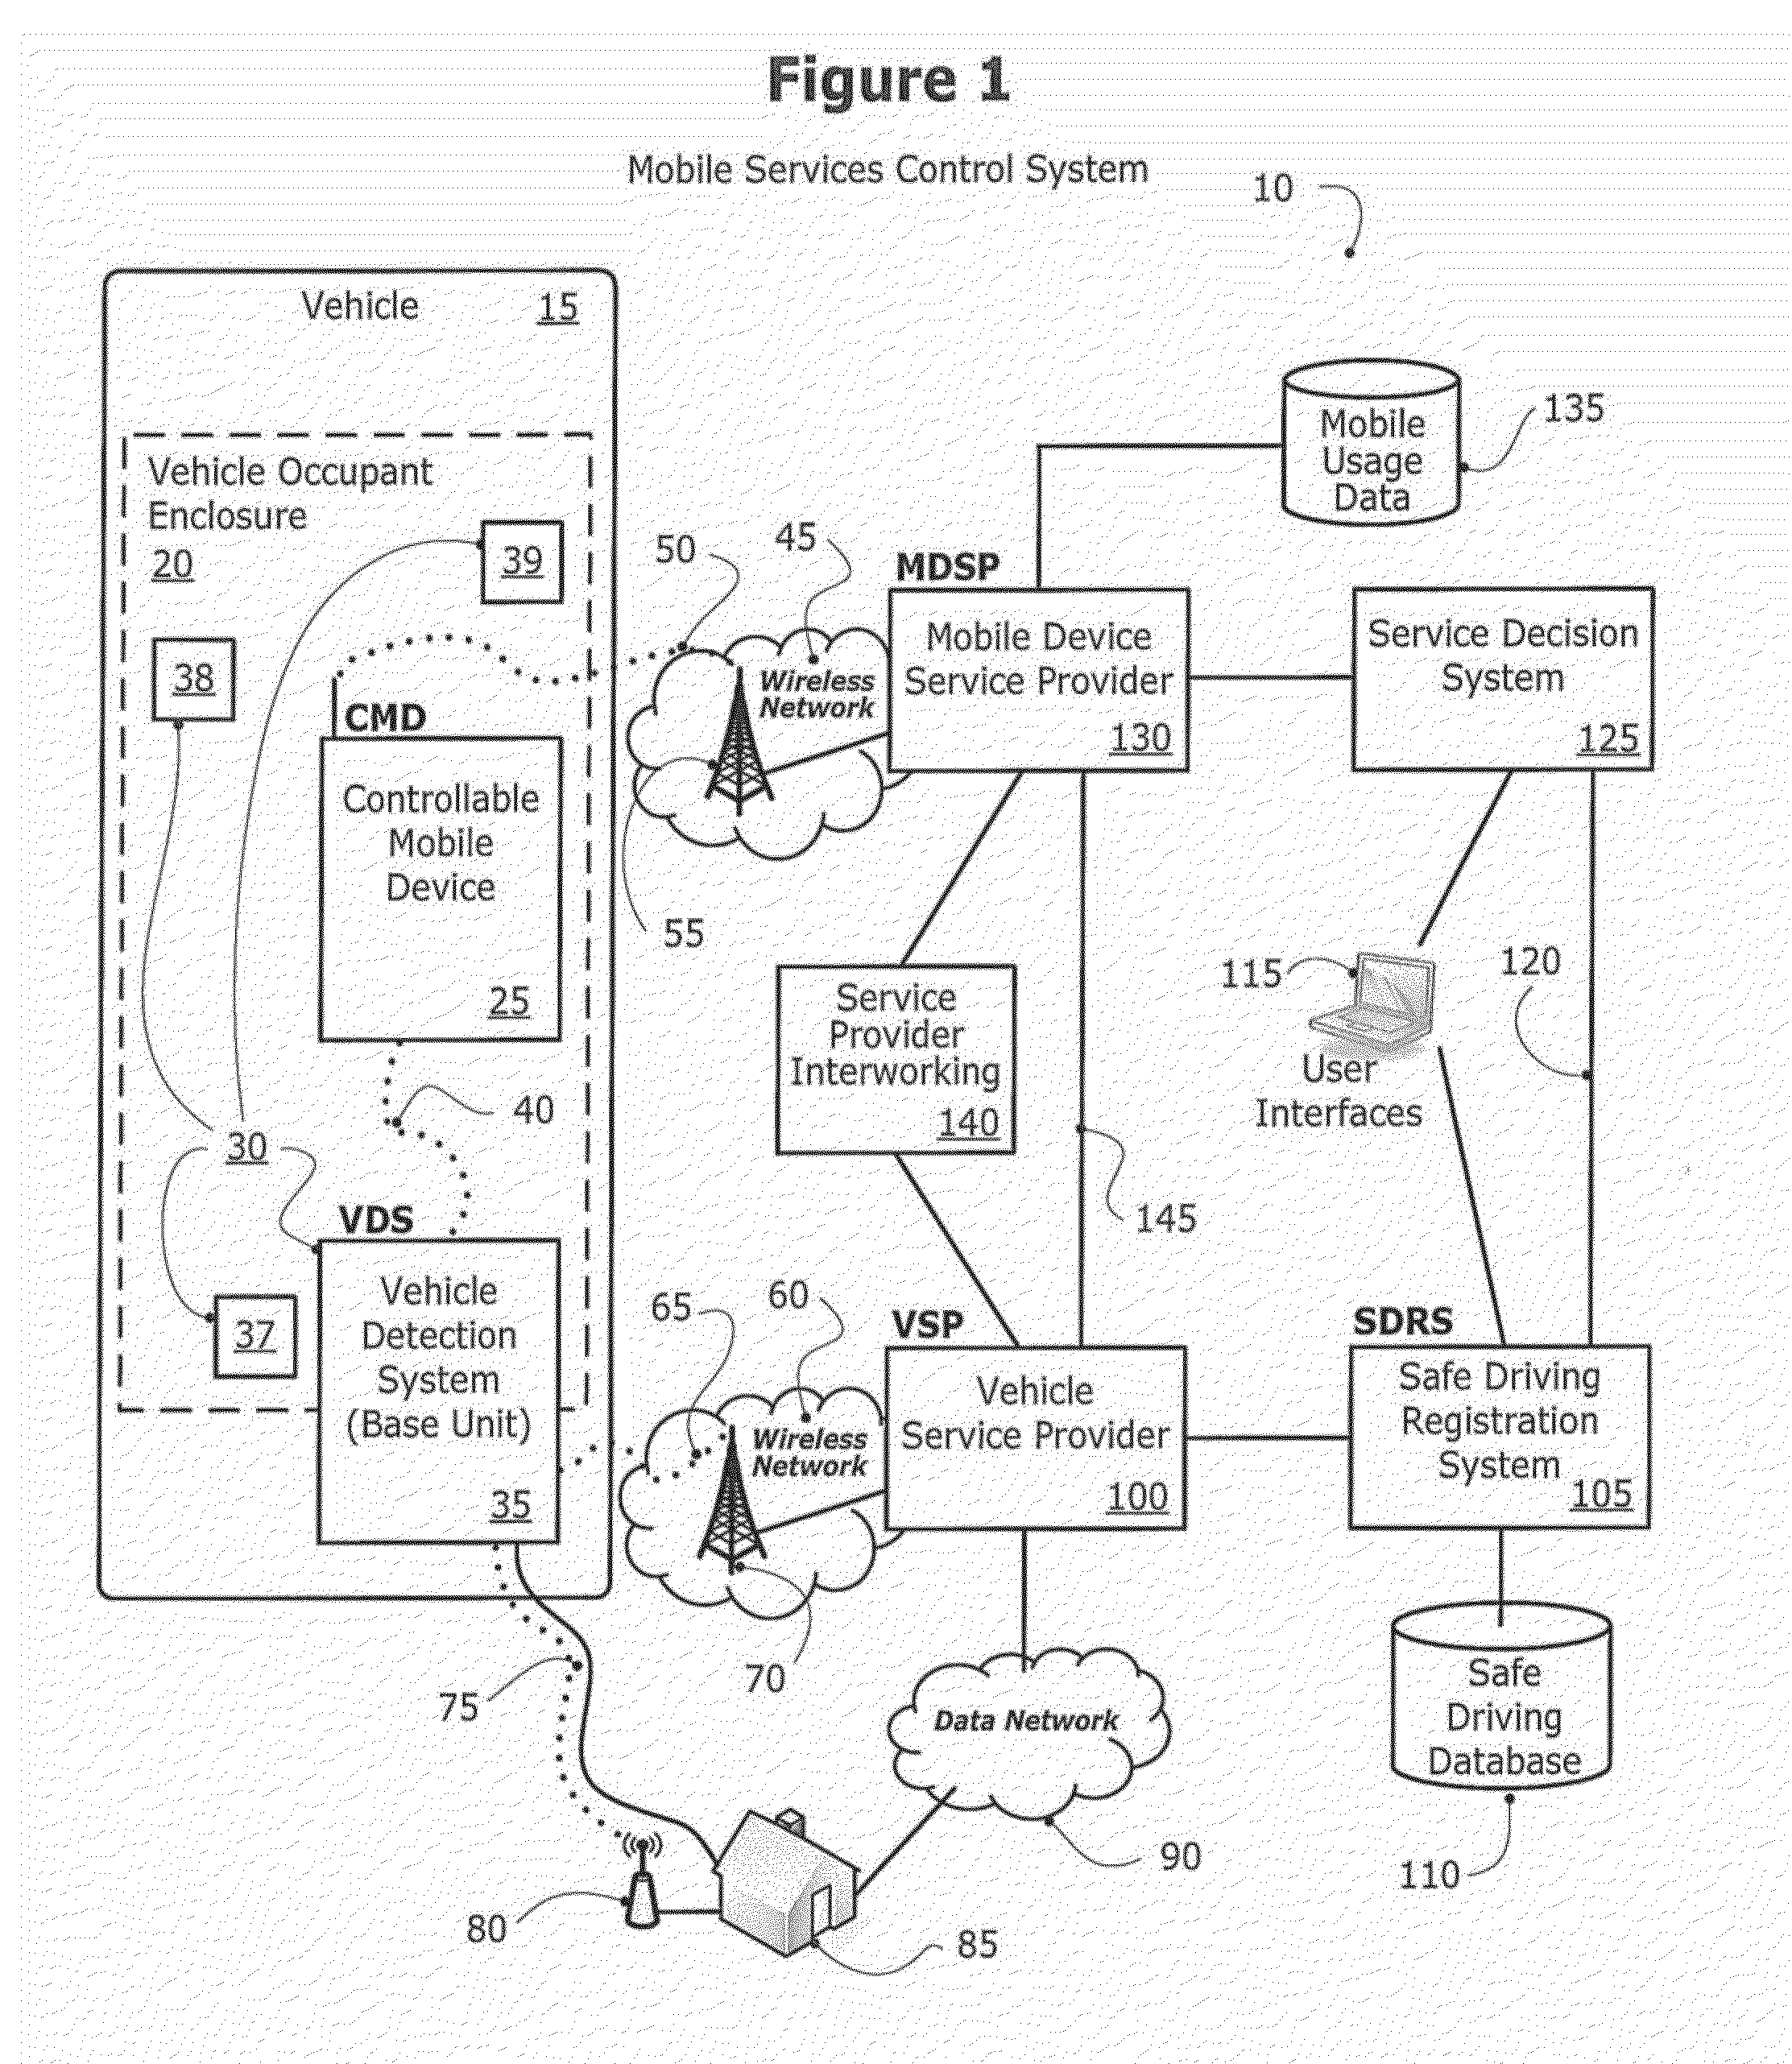 Method and system for controlling and modifying driving behaviors